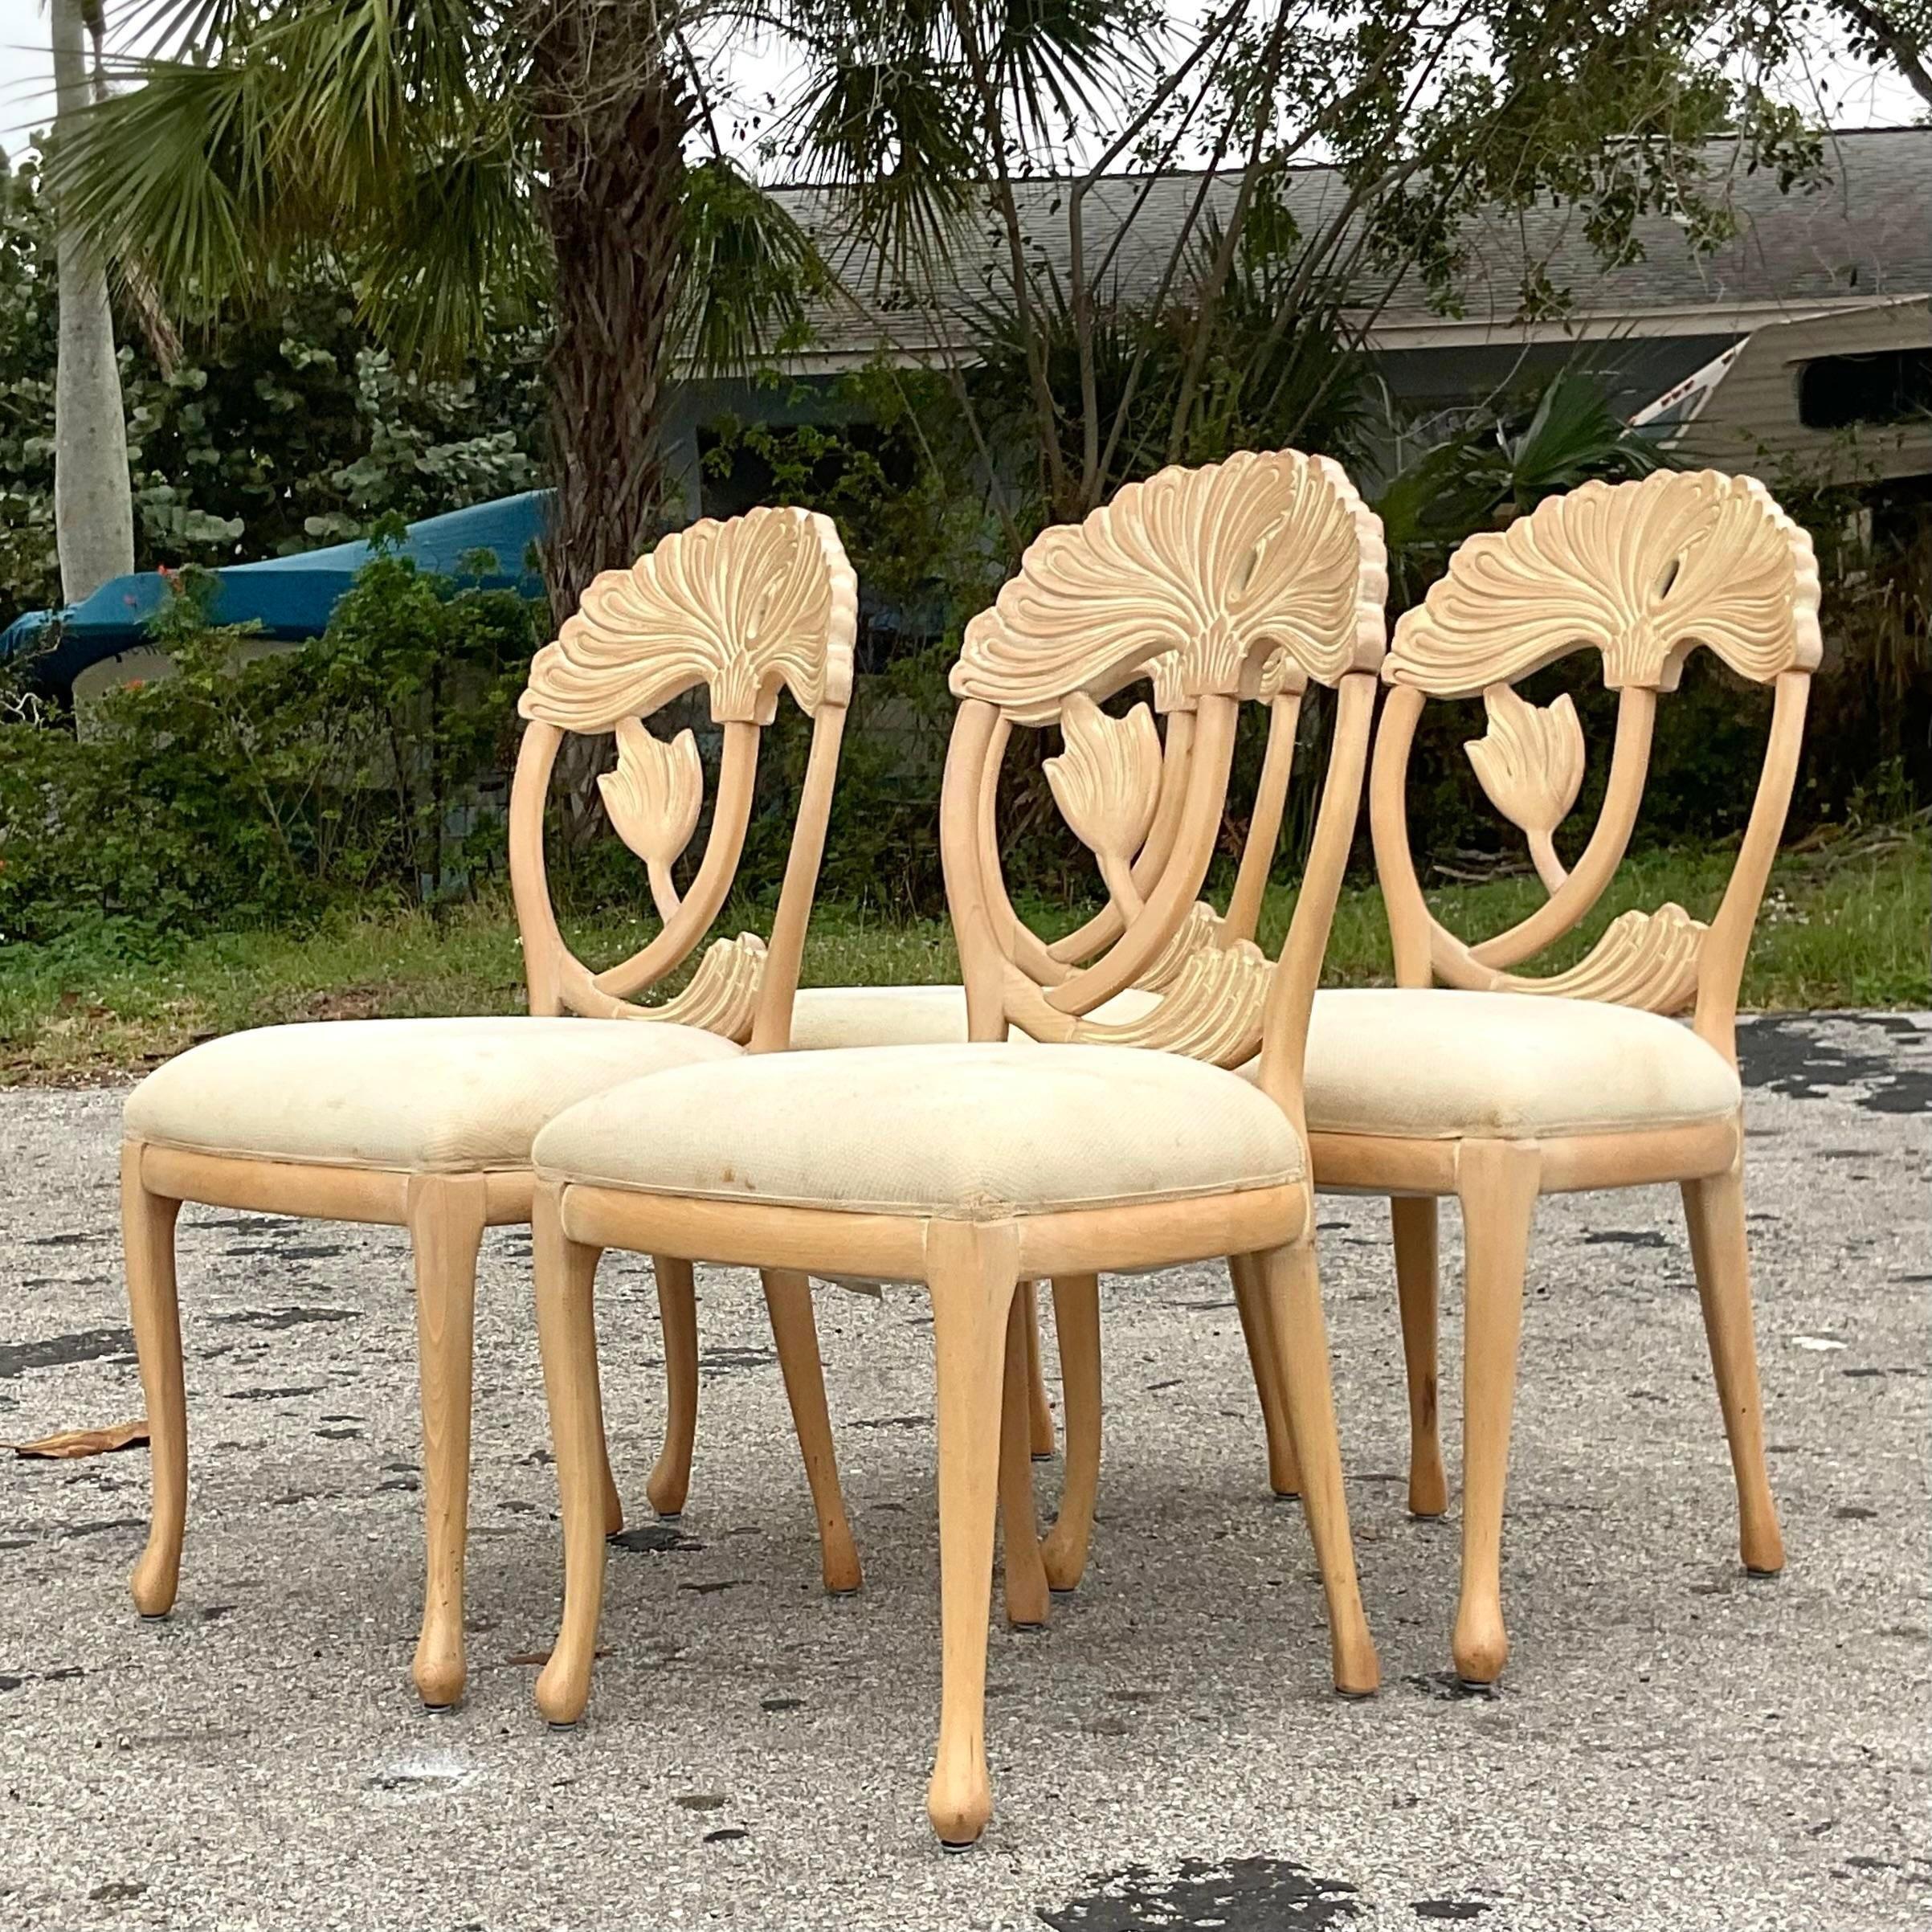 American Vintage Coastal Andre Originals Carved Lily Dining Chairs - Set of 4 For Sale